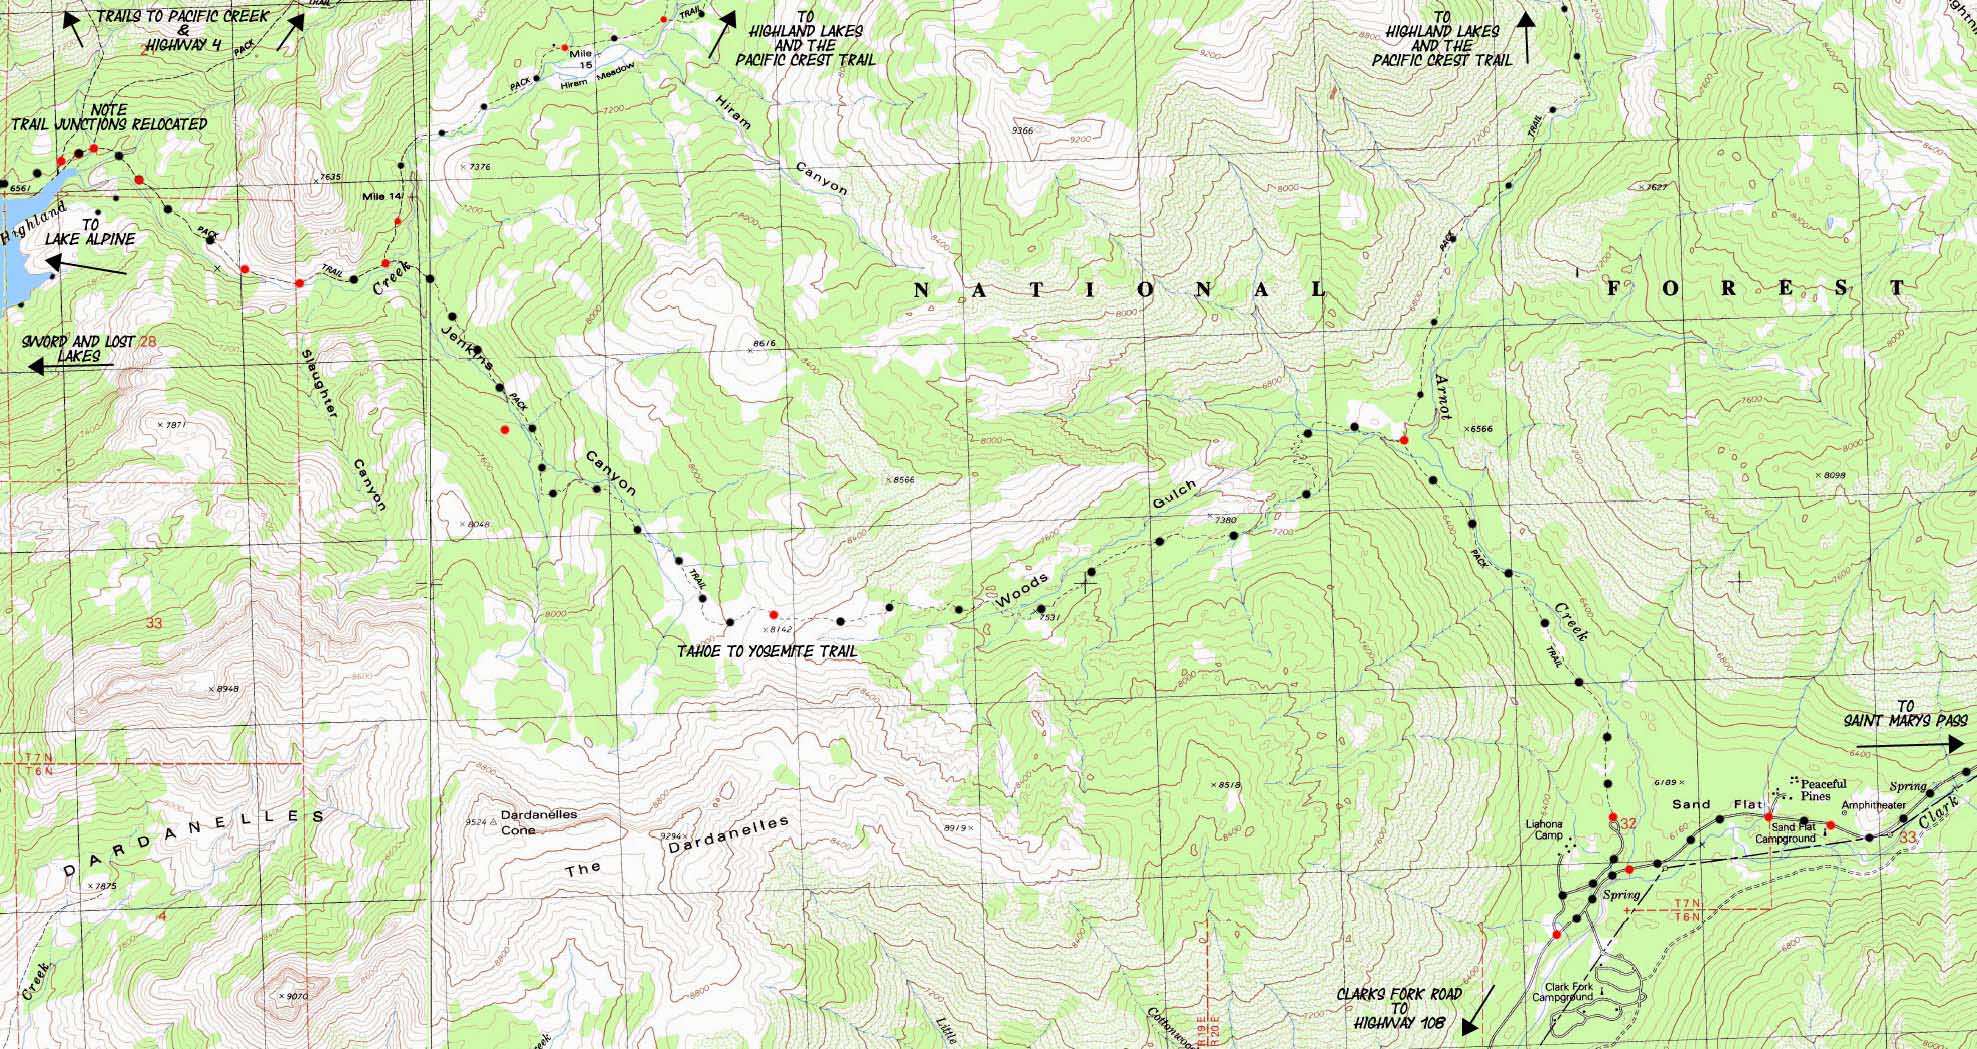 Topo Hiking Map Jenkins Canyon to Sand Flat Campground on Clarks Fork Road.